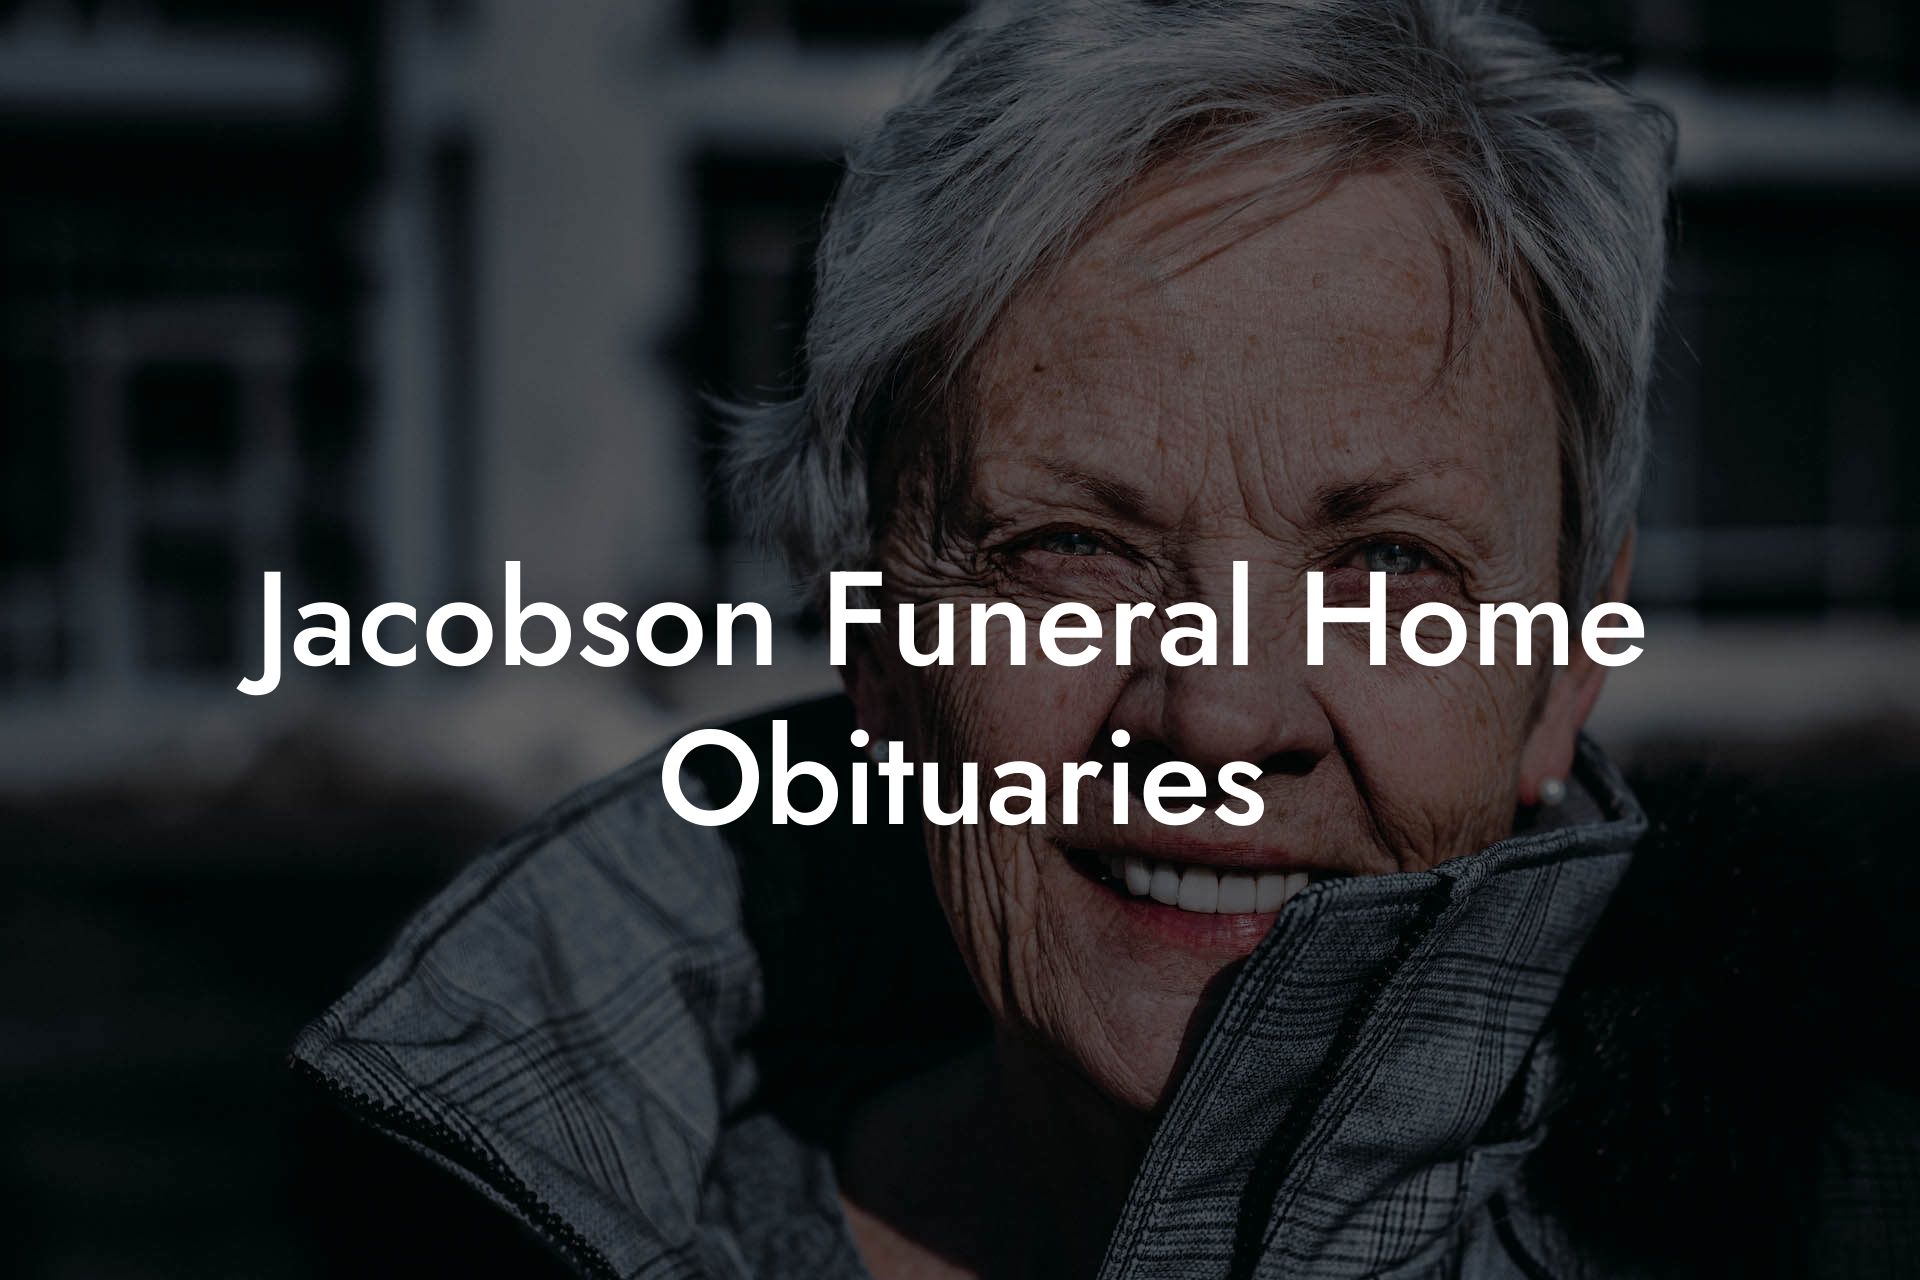 Jacobson Funeral Home Obituaries